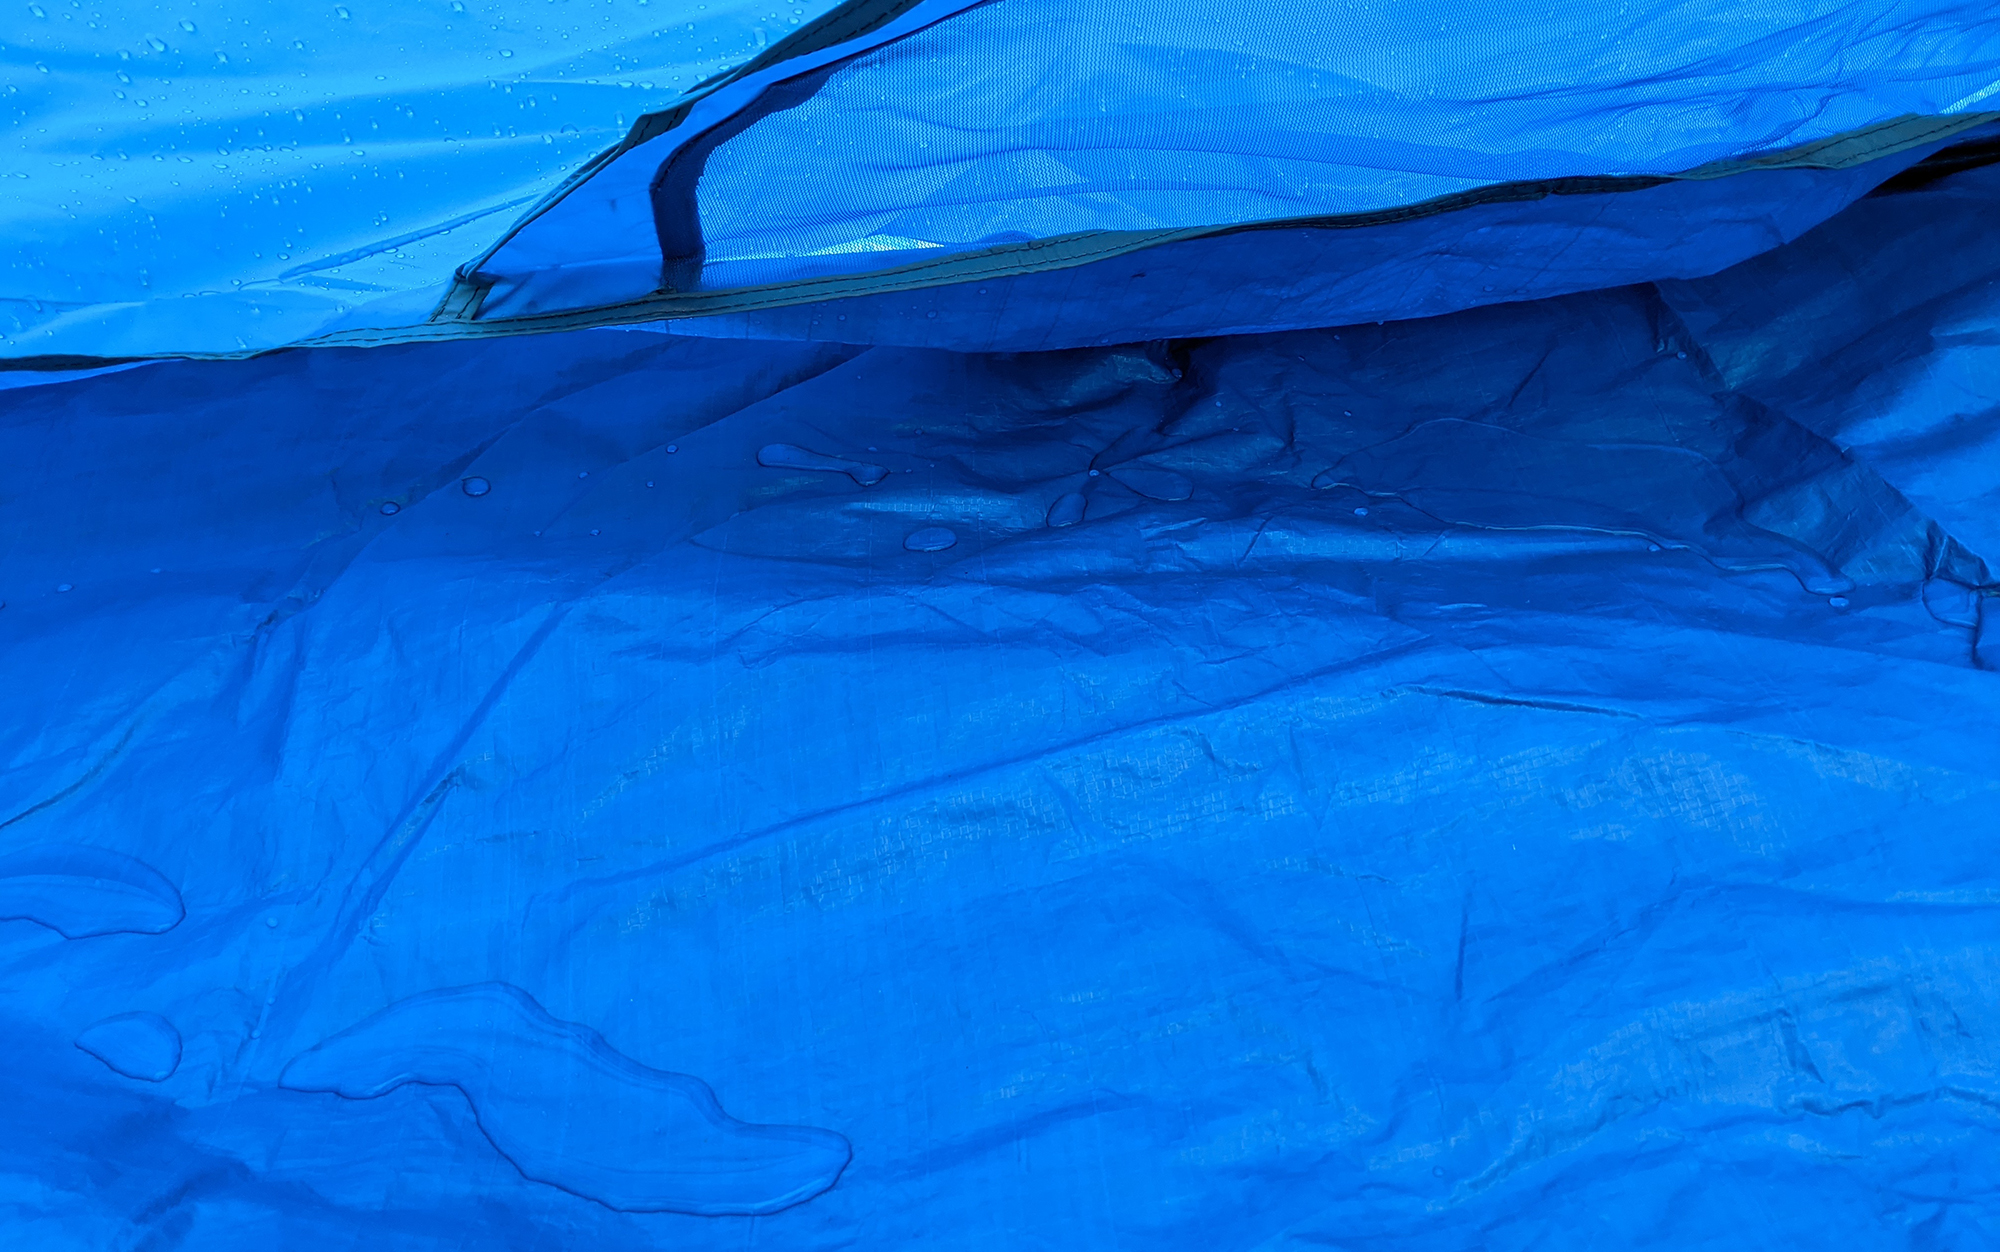 A water puddle pools in a tent corner.